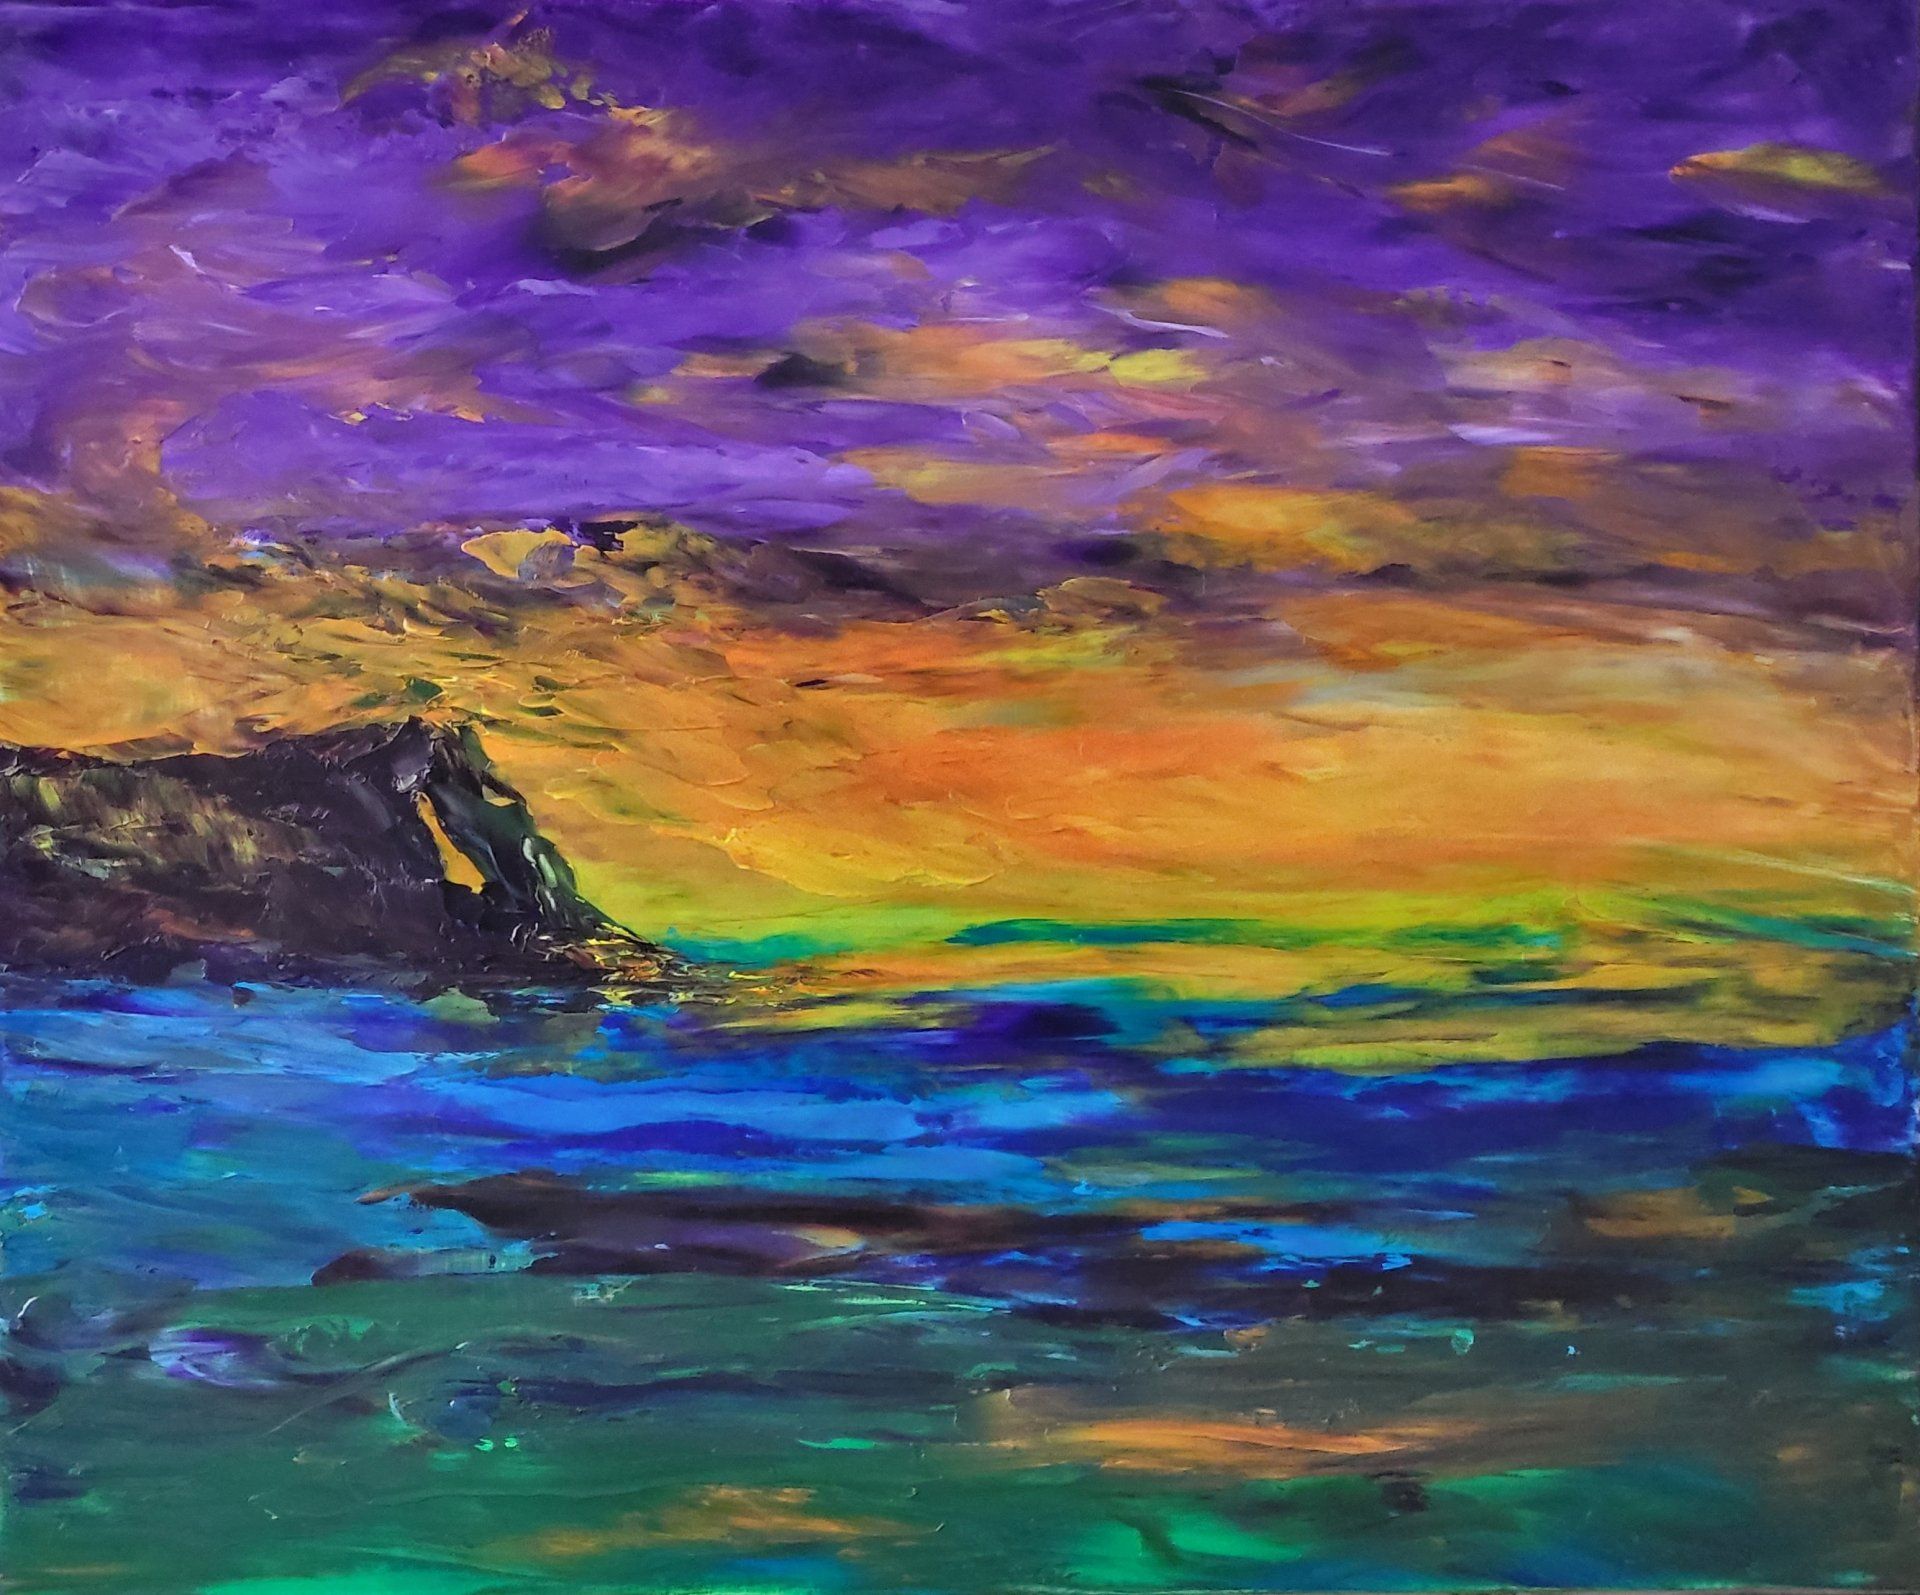 Sunset: Brilliant orange yellow purple and blues of a sunset in the Charlrvoix reagion of Québec, Canada. A portend of an impending storm that did not happen on this evening. Just a cloudy and windy evening. This is a 12 in x 10 in oil on masonite